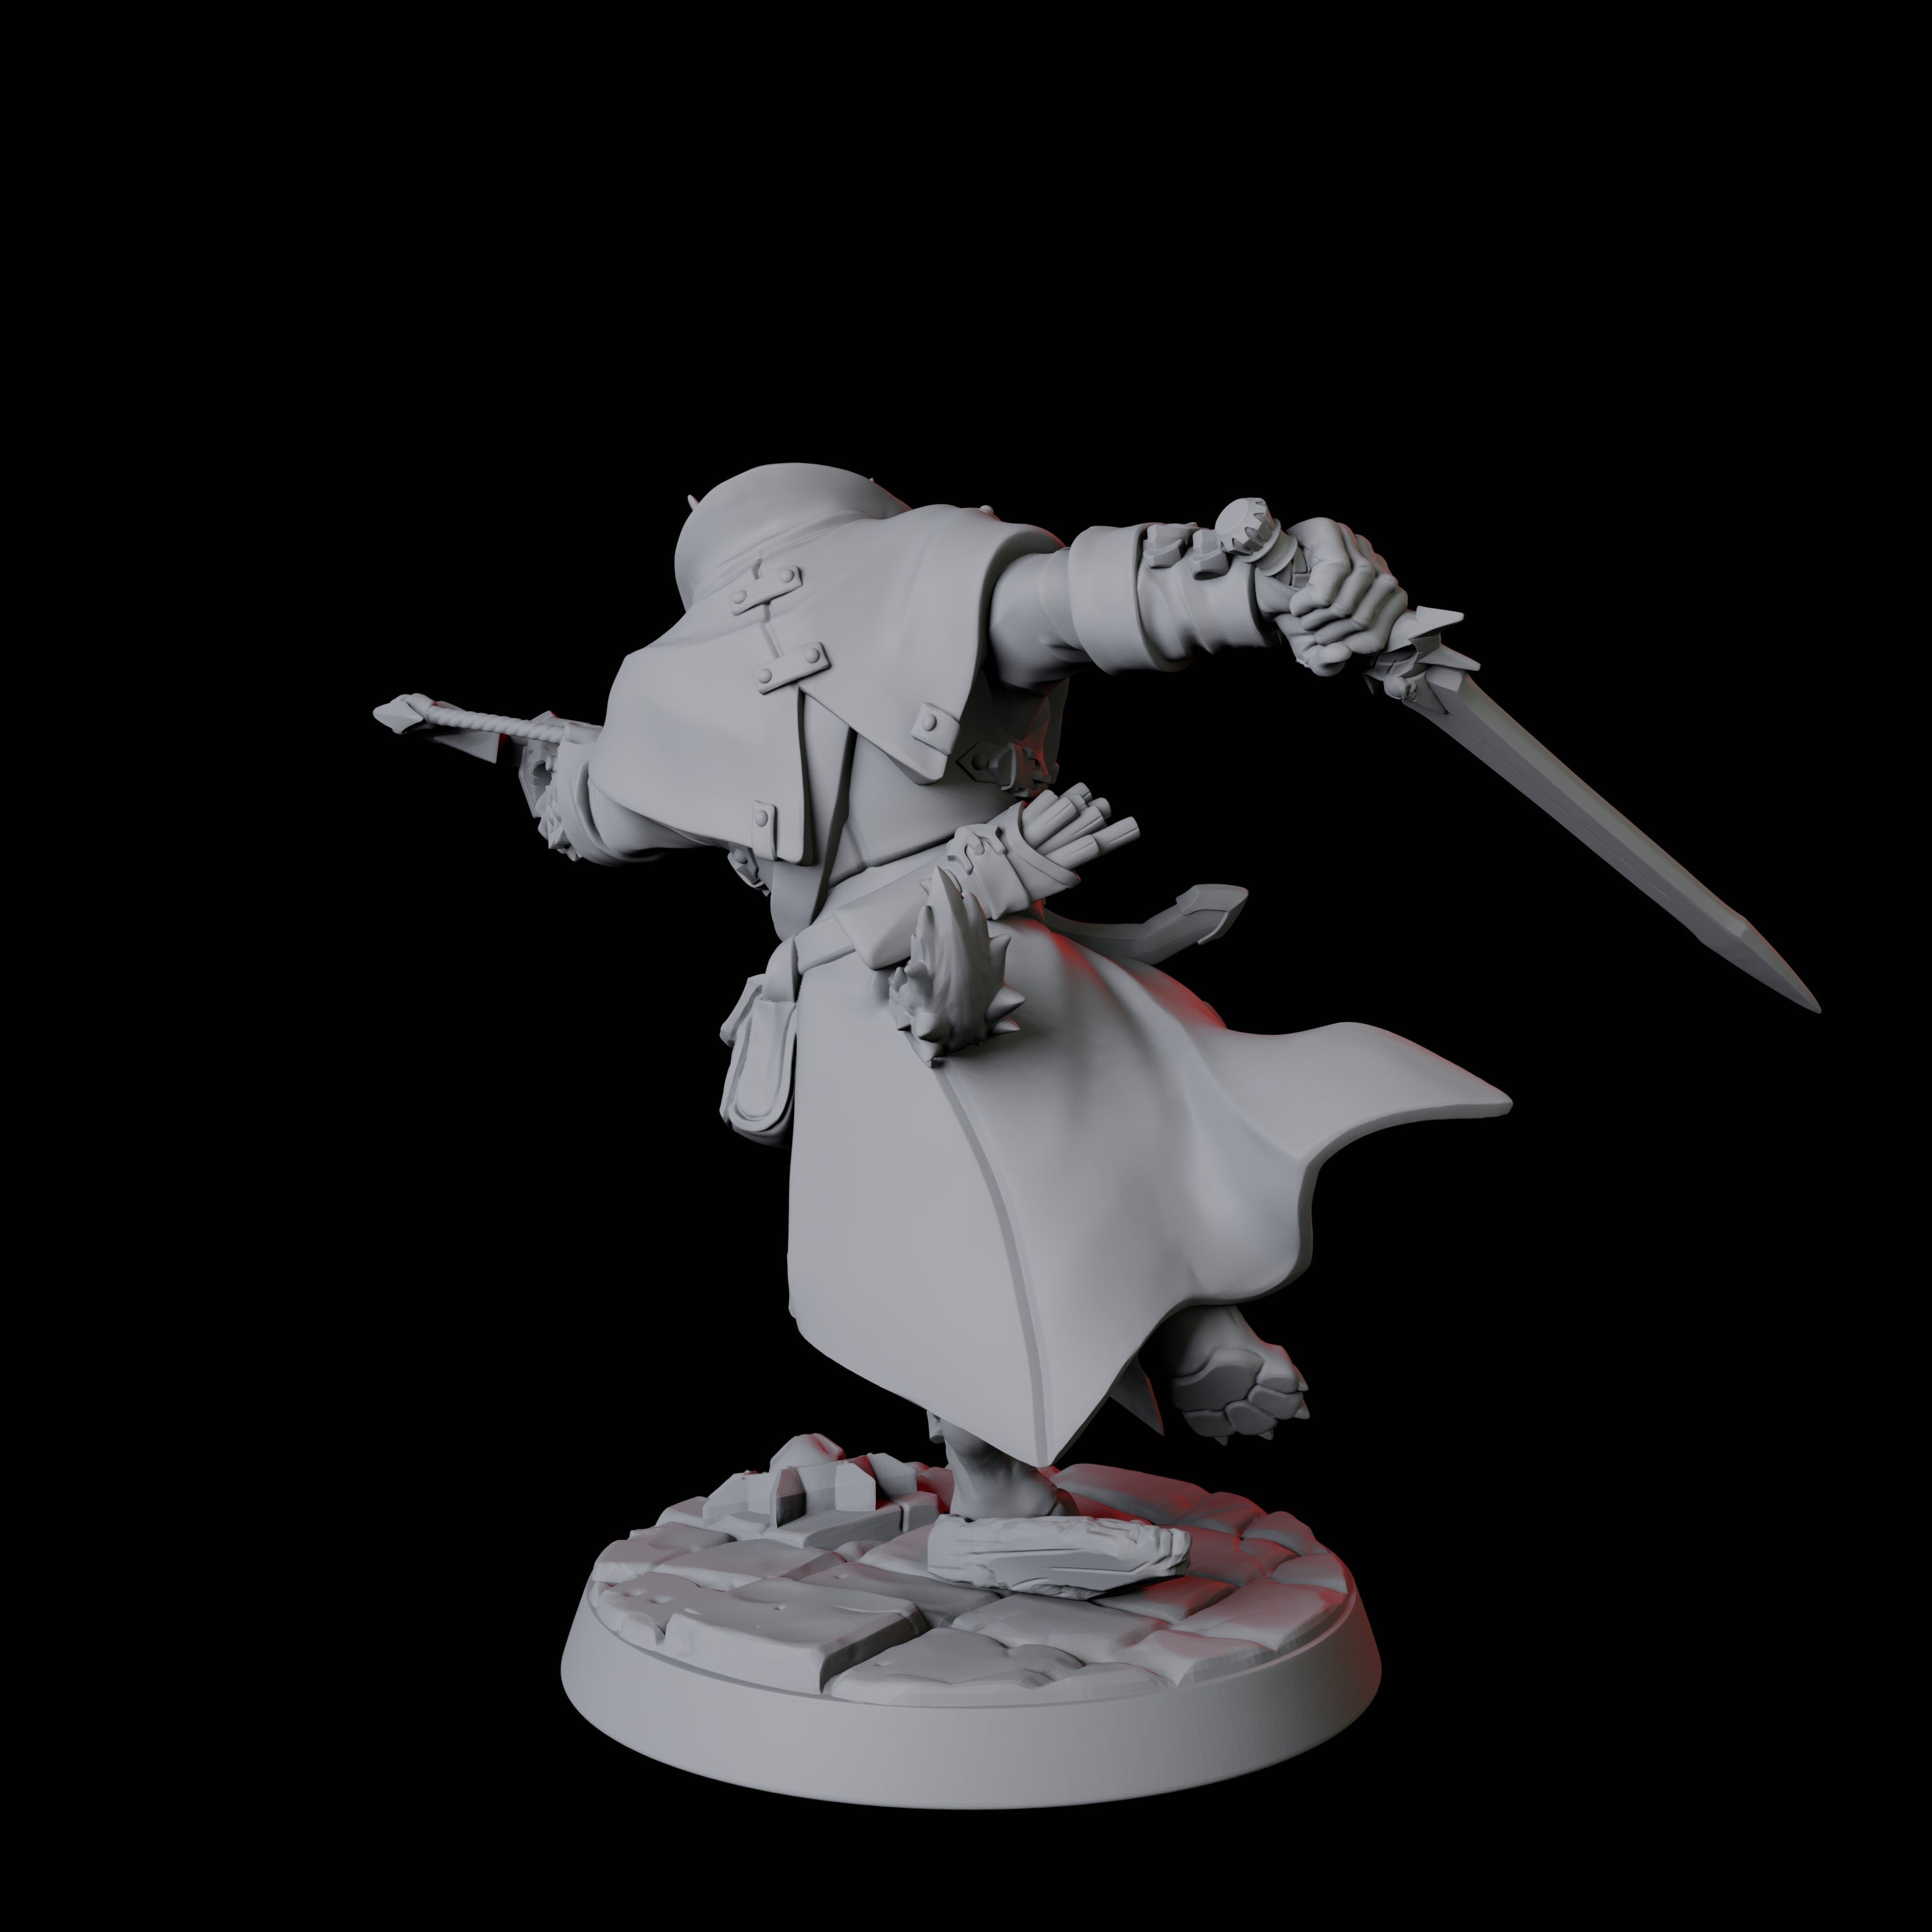 Werewolf Vampire Hunter A Miniature for Dungeons and Dragons, Pathfinder or other TTRPGs